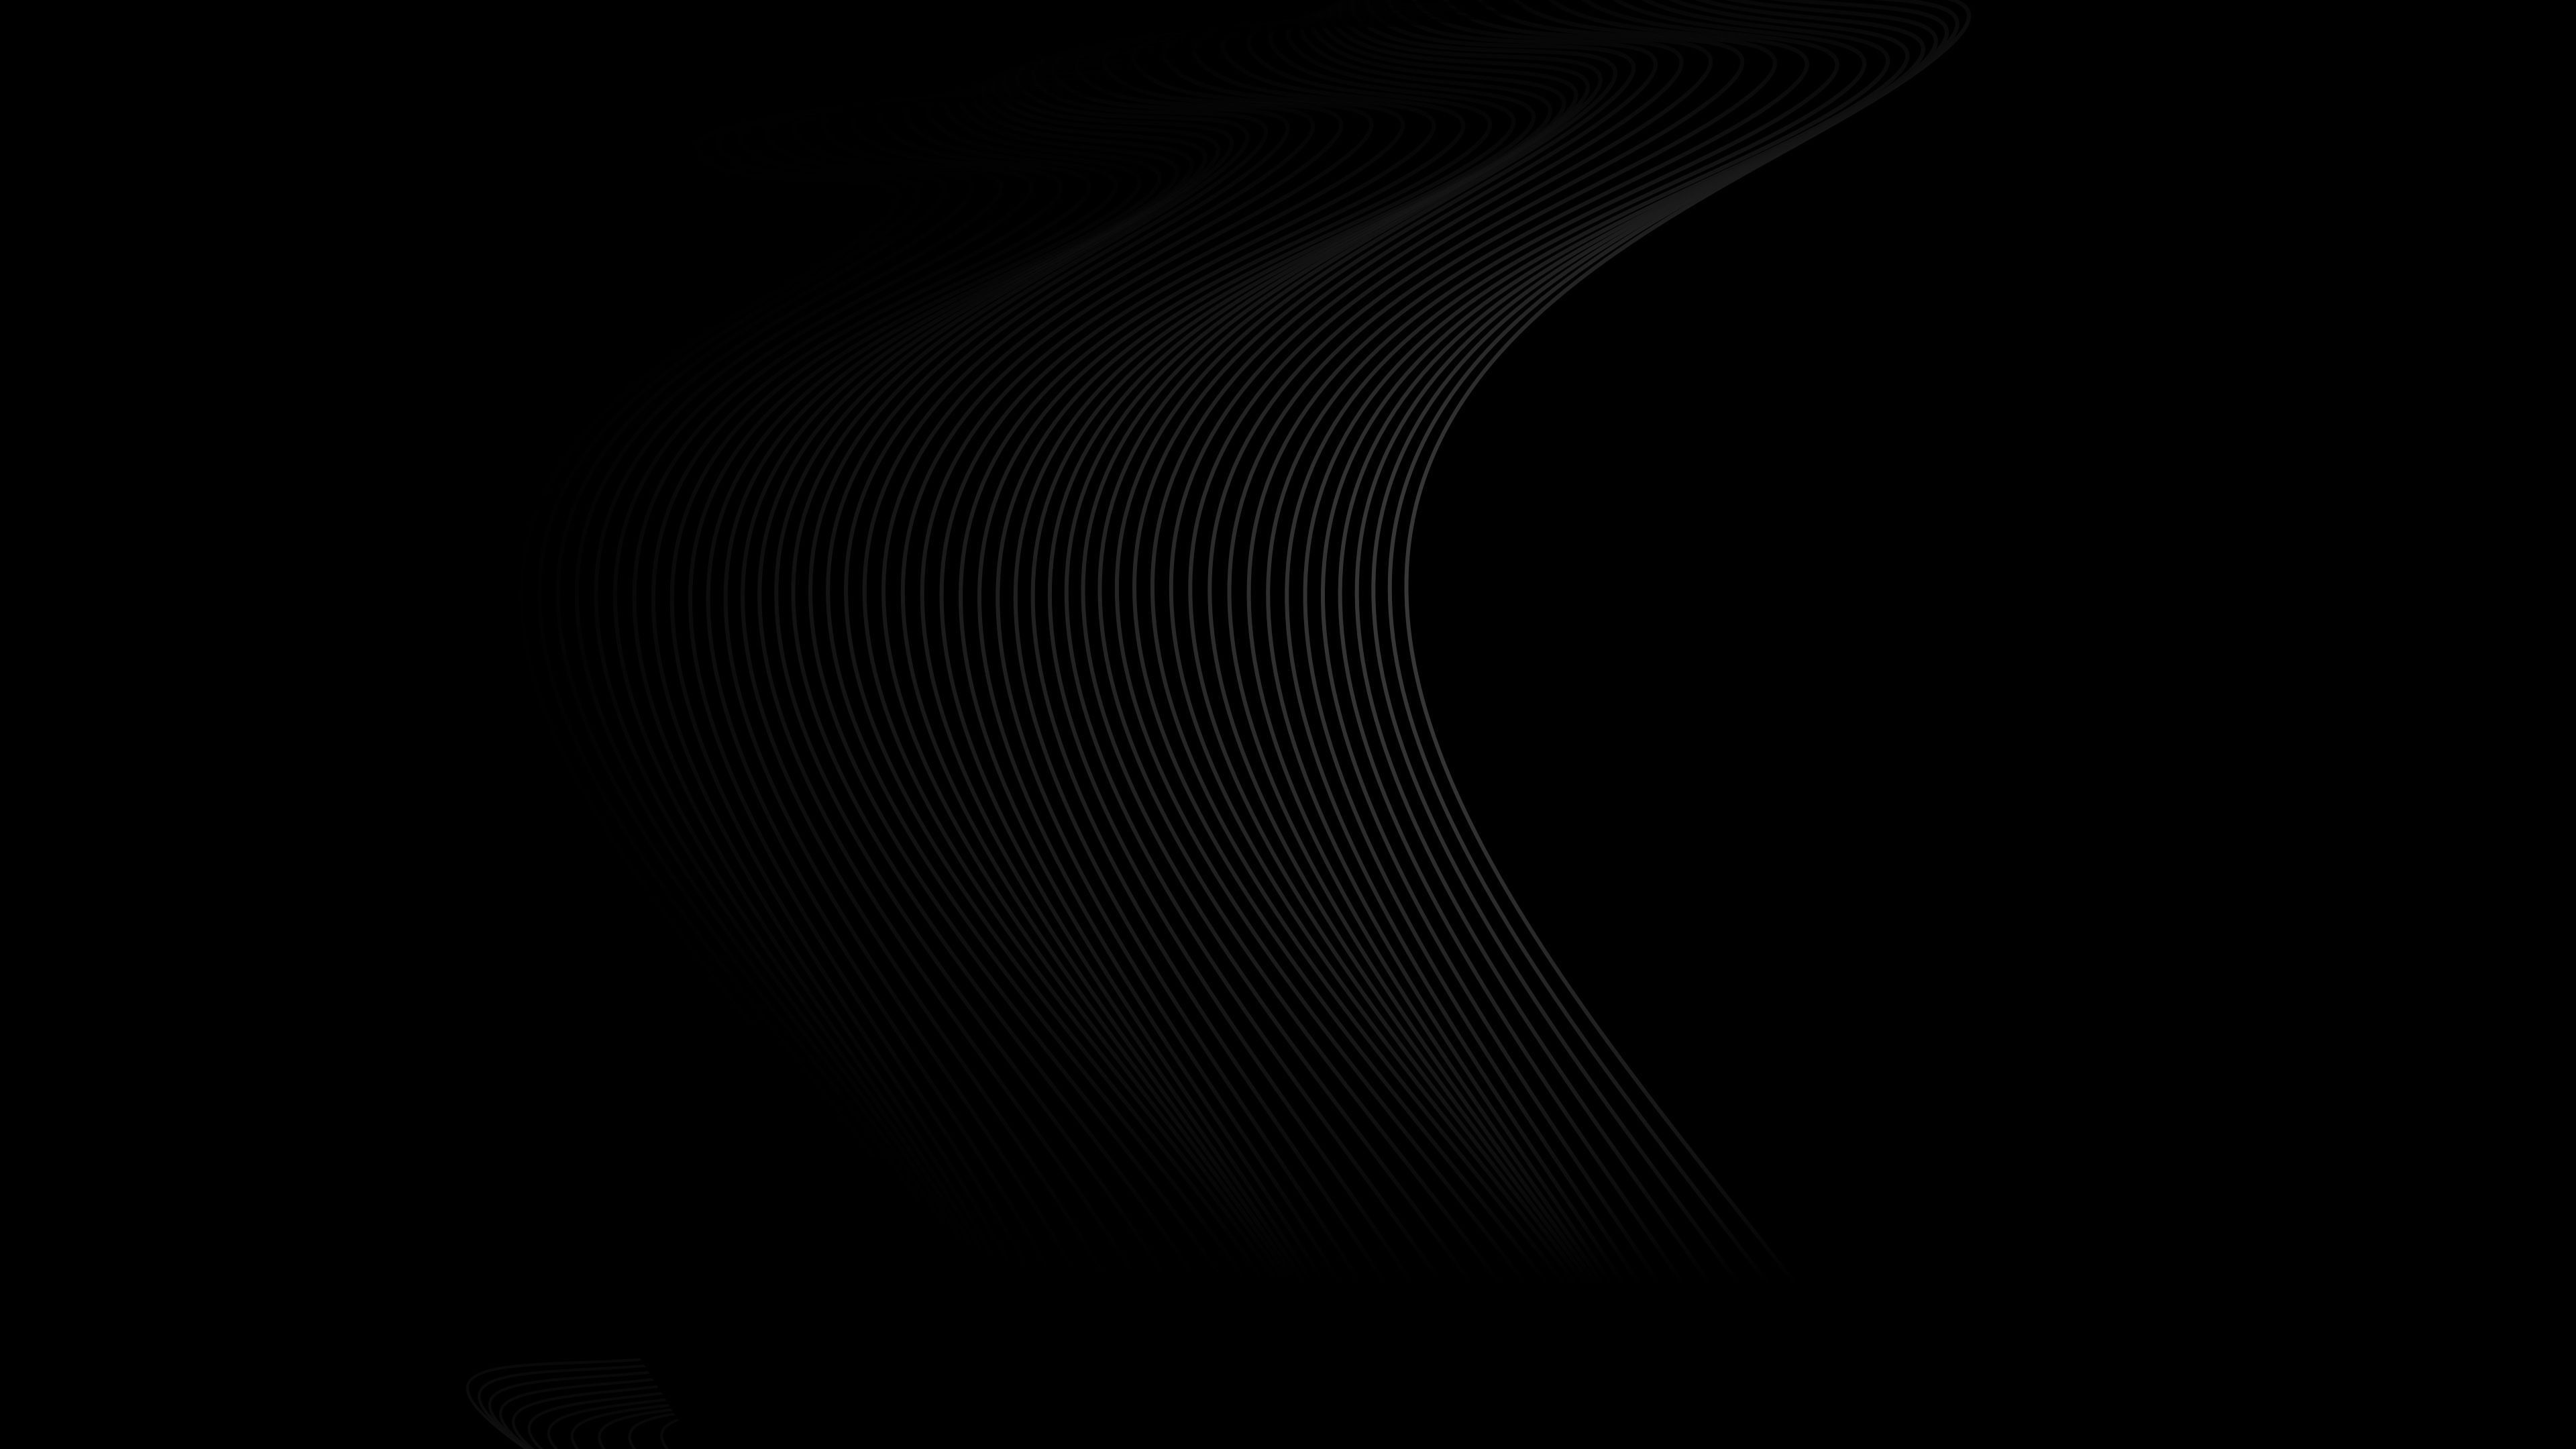 Black Abstract Wallpapers - Top 35 Best Black Abstract Wallpapers Download